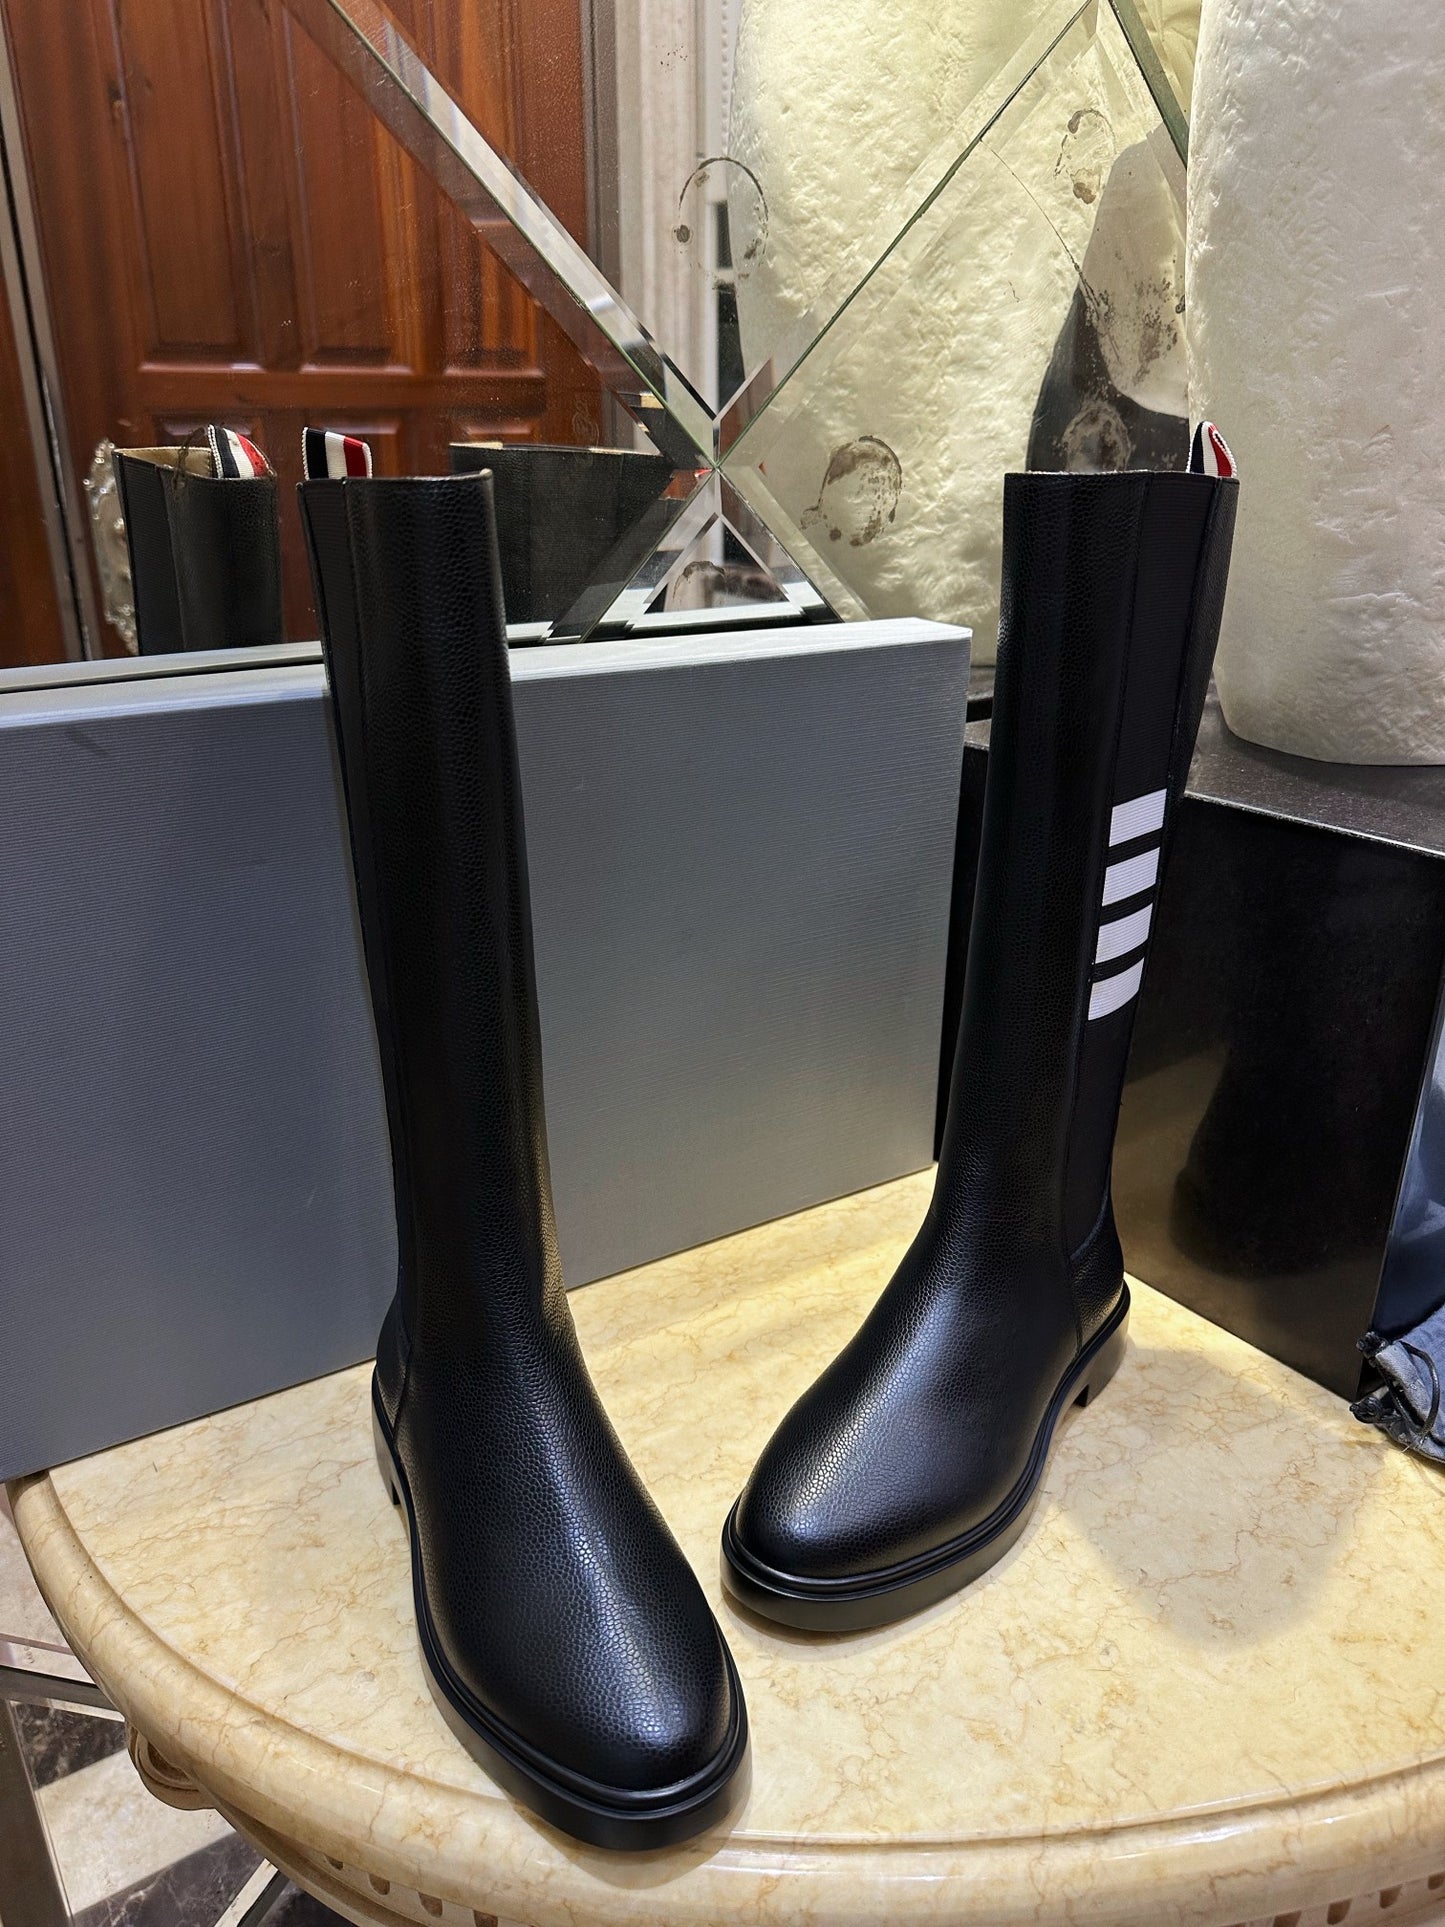 𝗧𝗛𝗢𝗠 𝗕𝗥𝗢𝗪𝗡𝗘 BOOTS